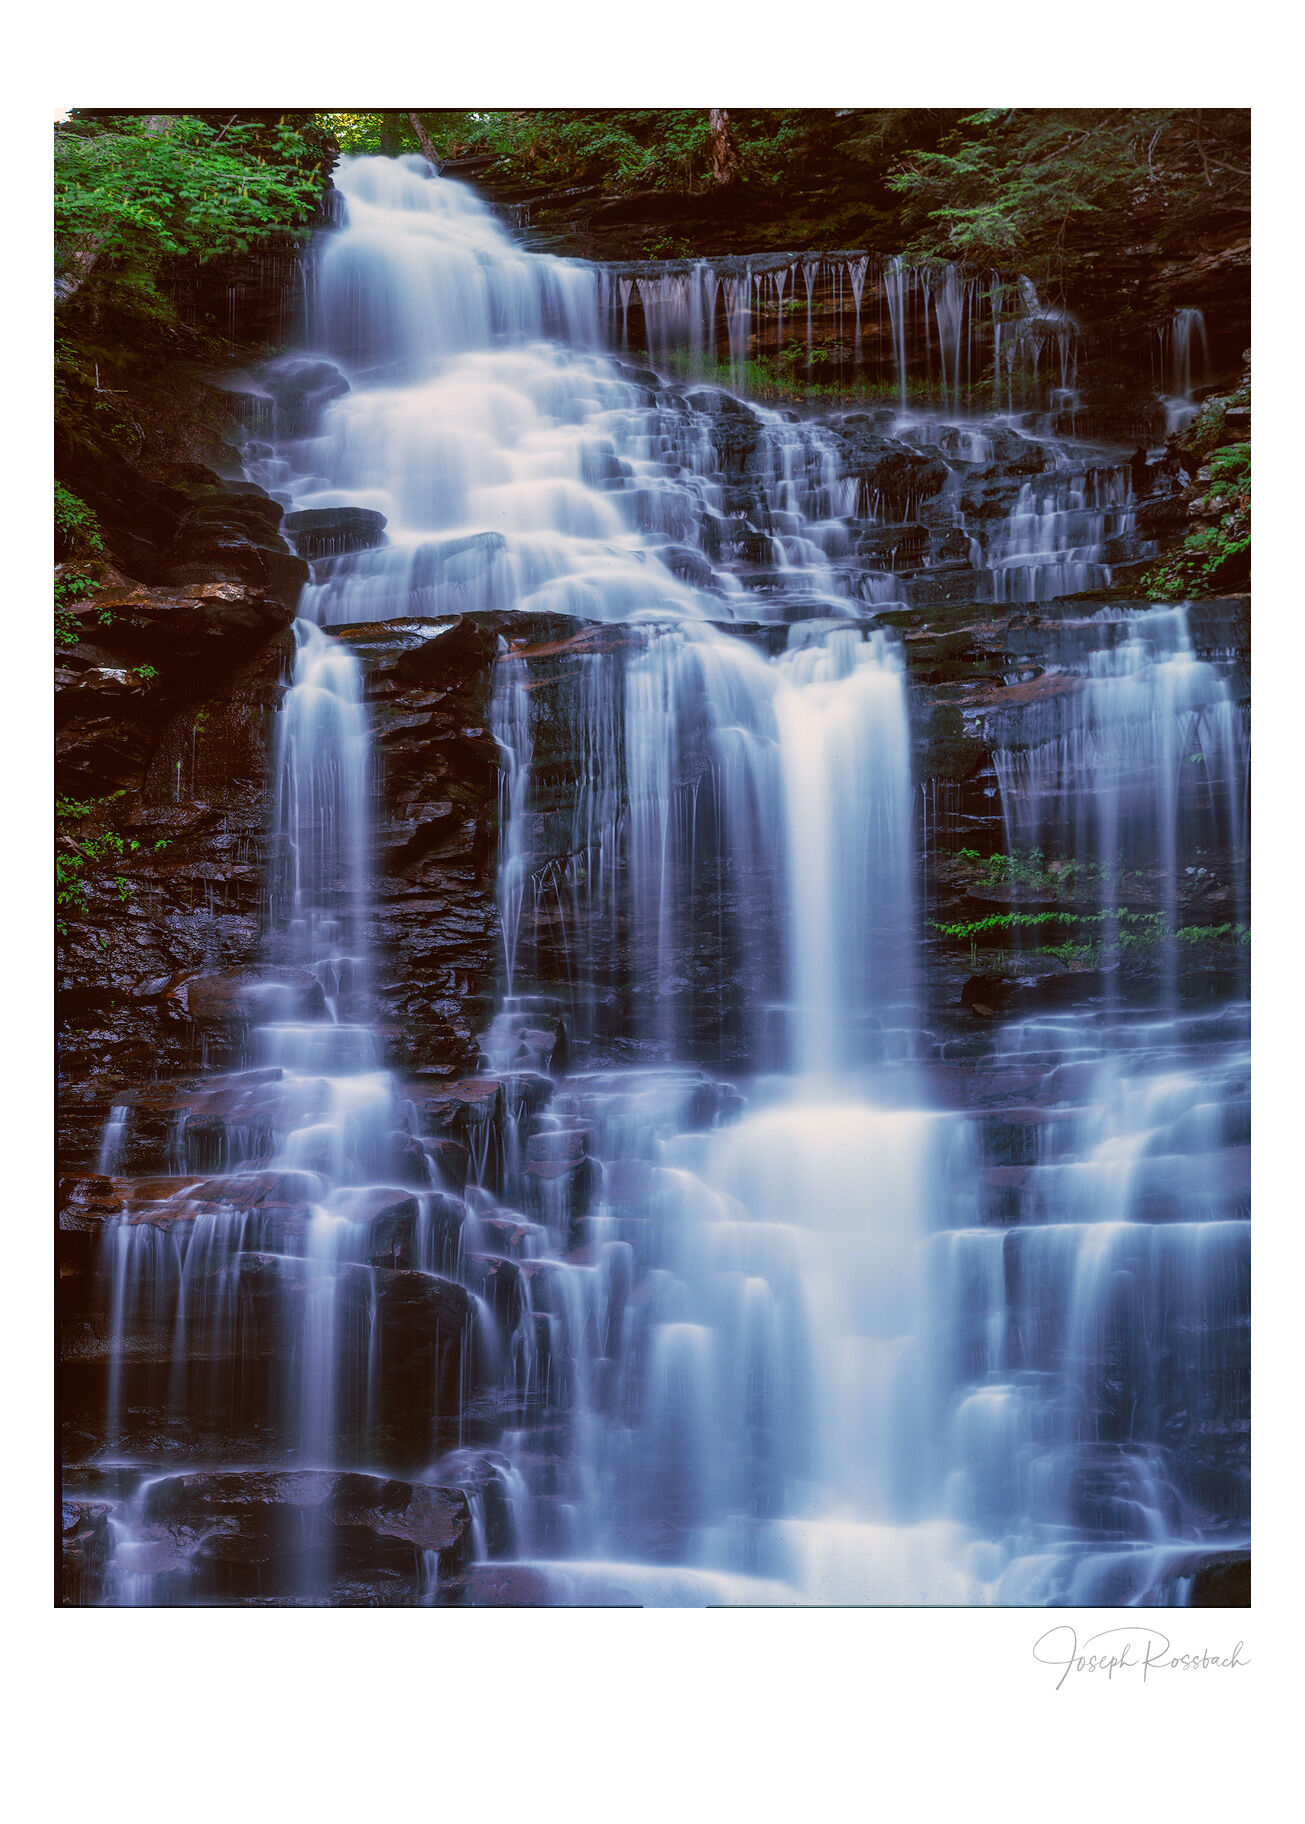 It was a rough hike down the glens in Ricketts Glen State Park with a 50 pound bag of large format gear, but worth it to be able...